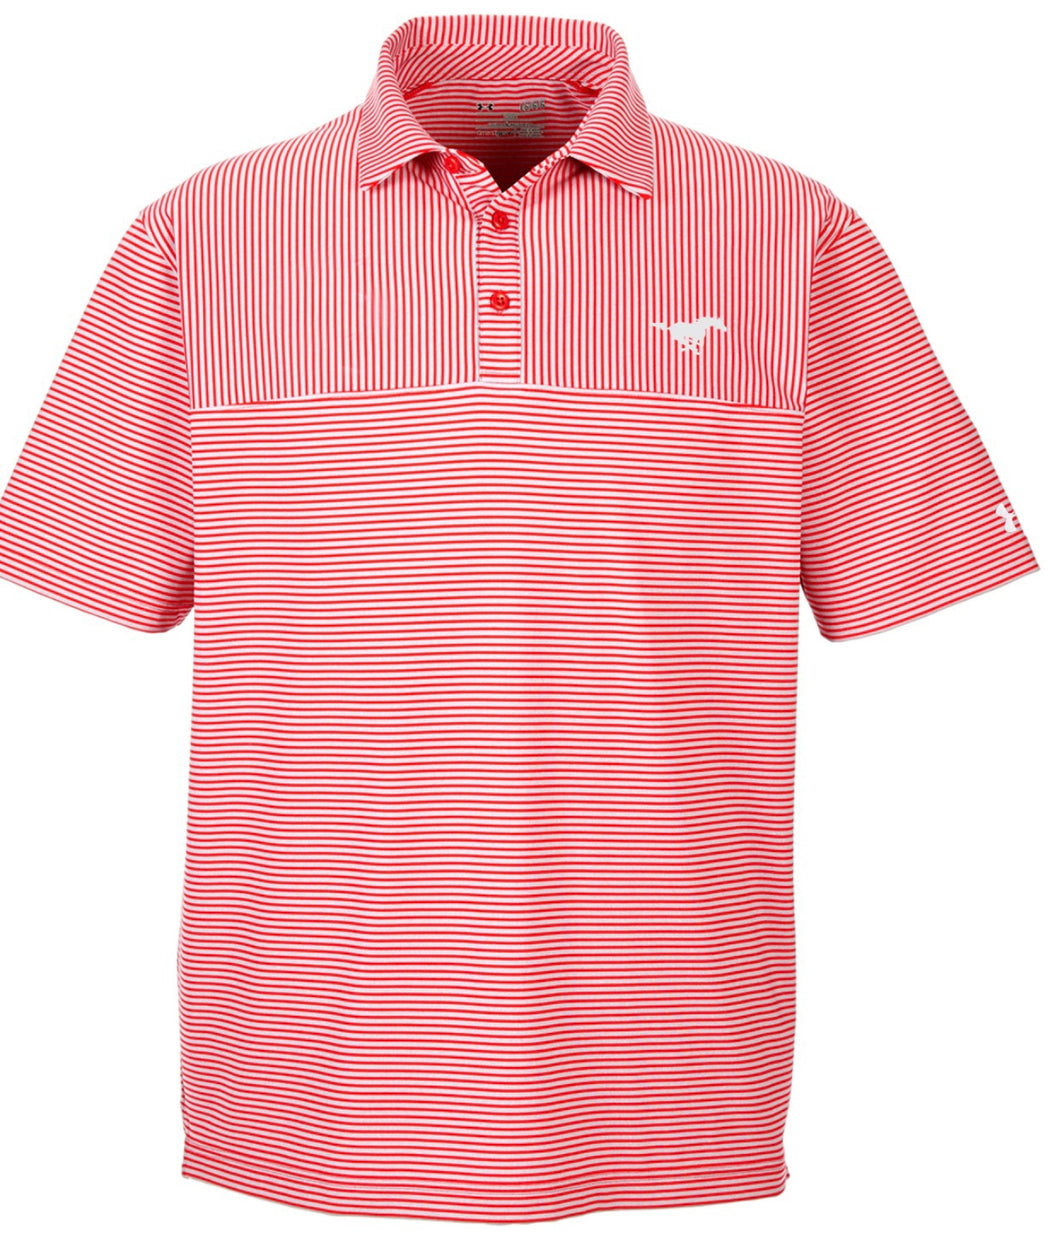 Under Armour Red Stripe Polo